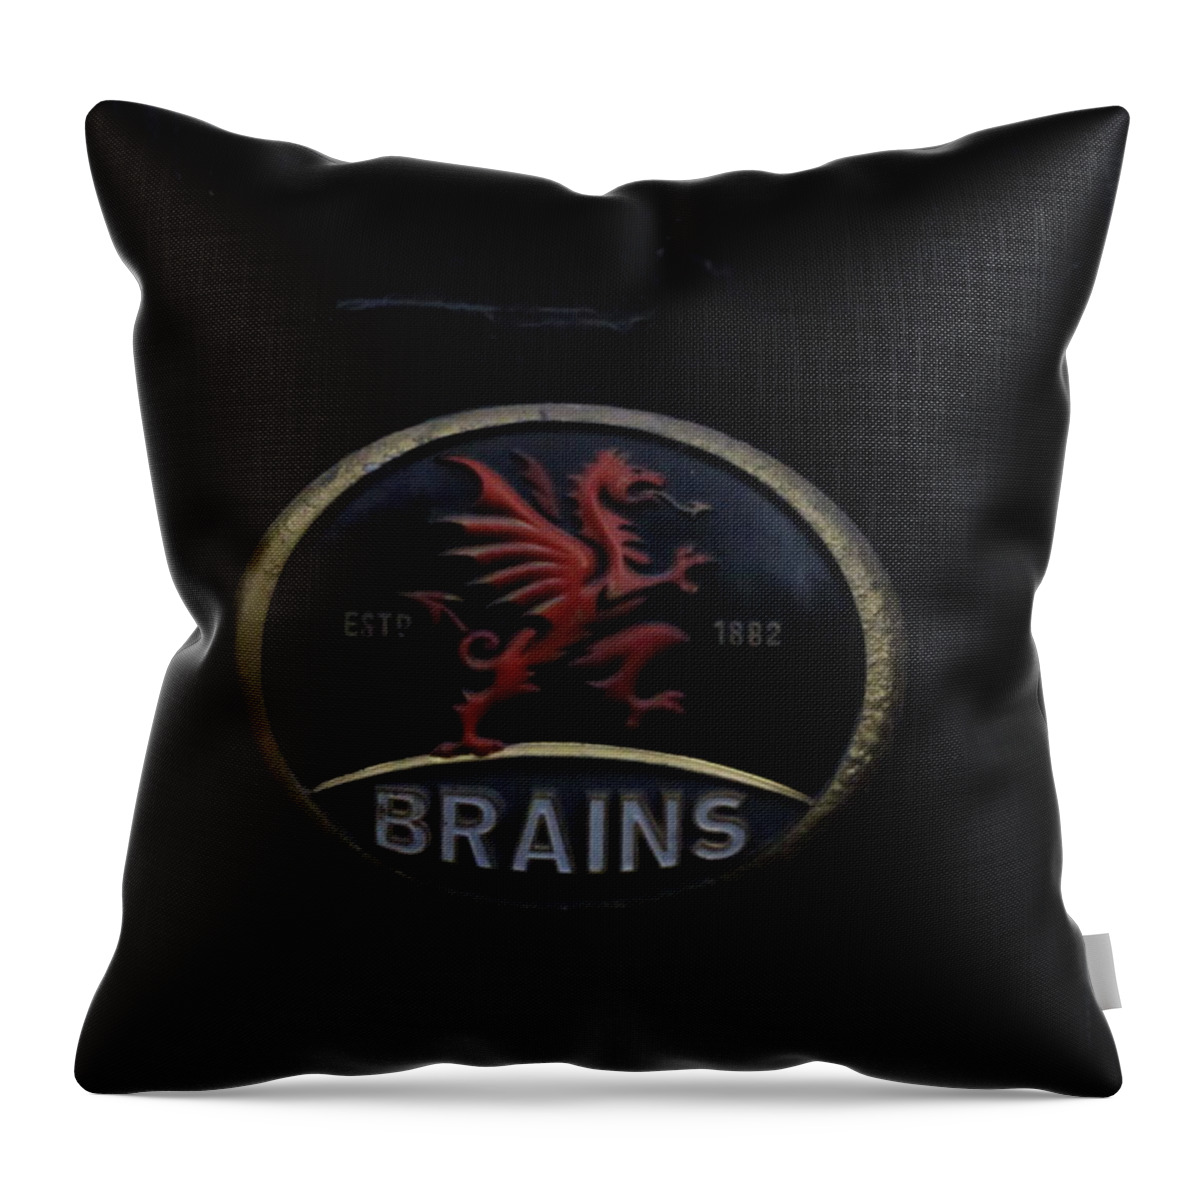 Brains Throw Pillow featuring the photograph Red Dragon by Ian Kowalski